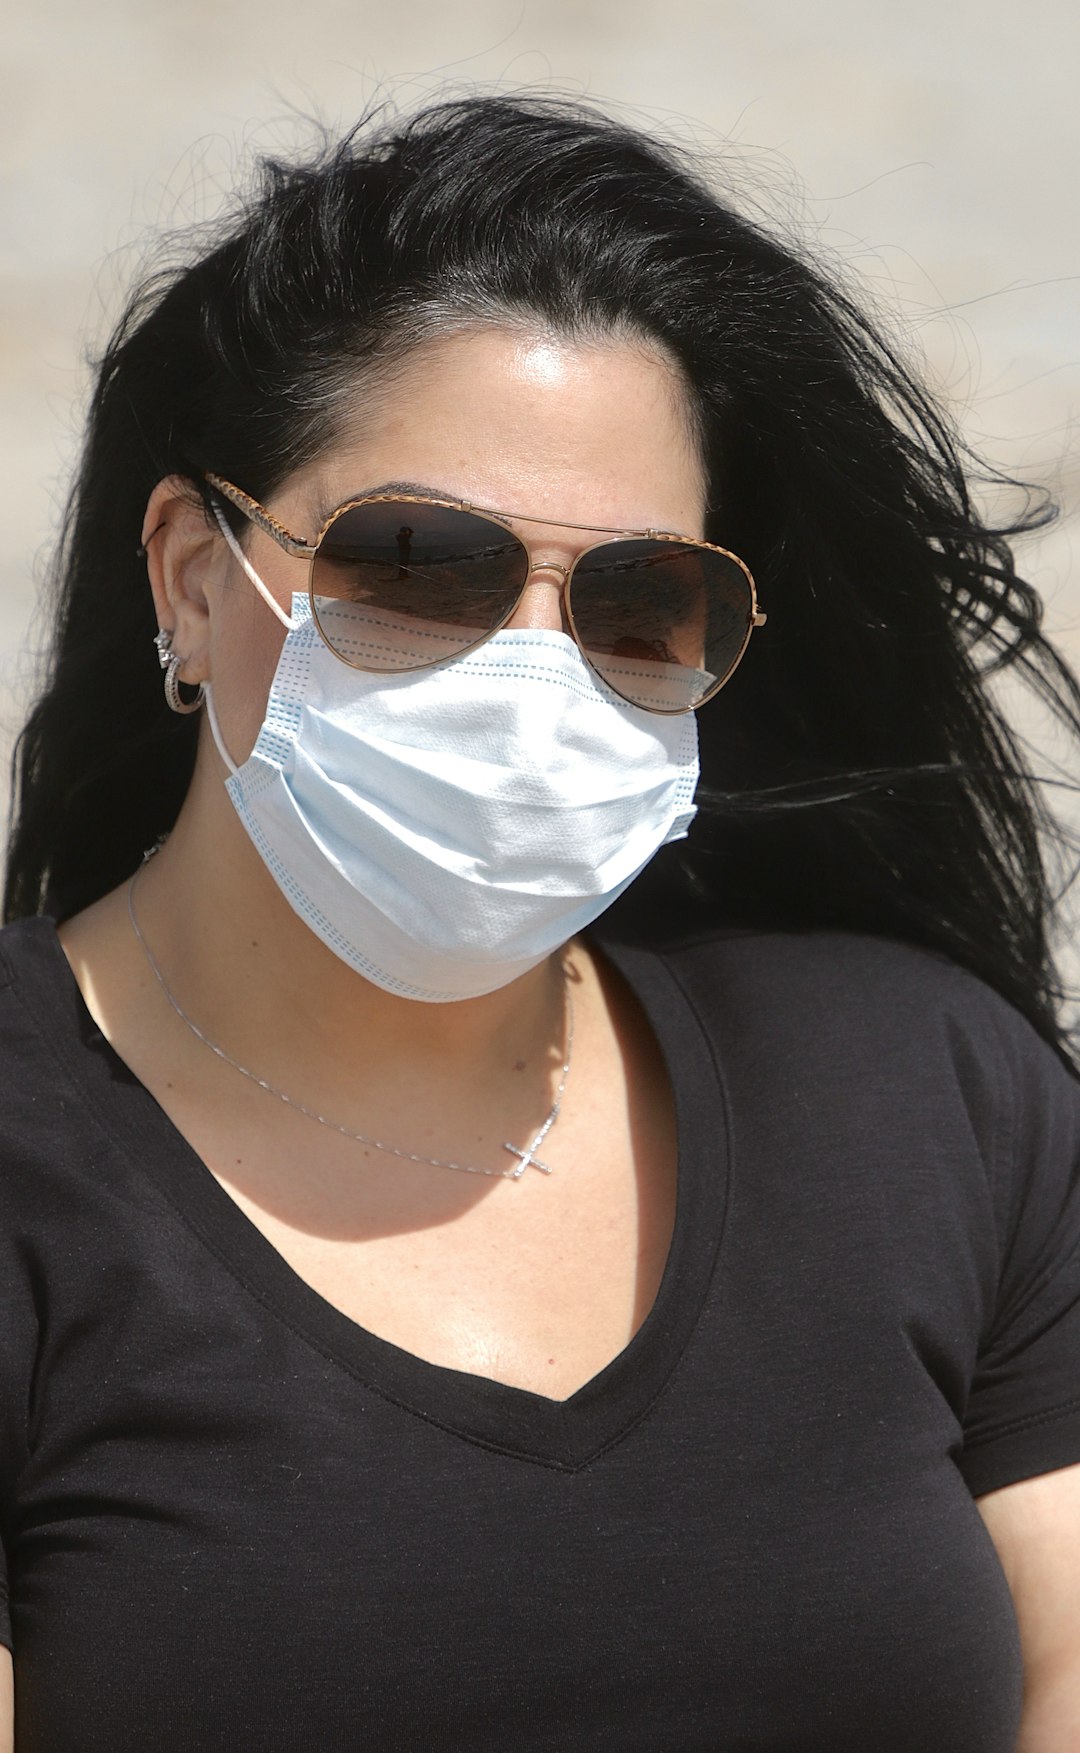 woman in black crew neck shirt wearing white face mask